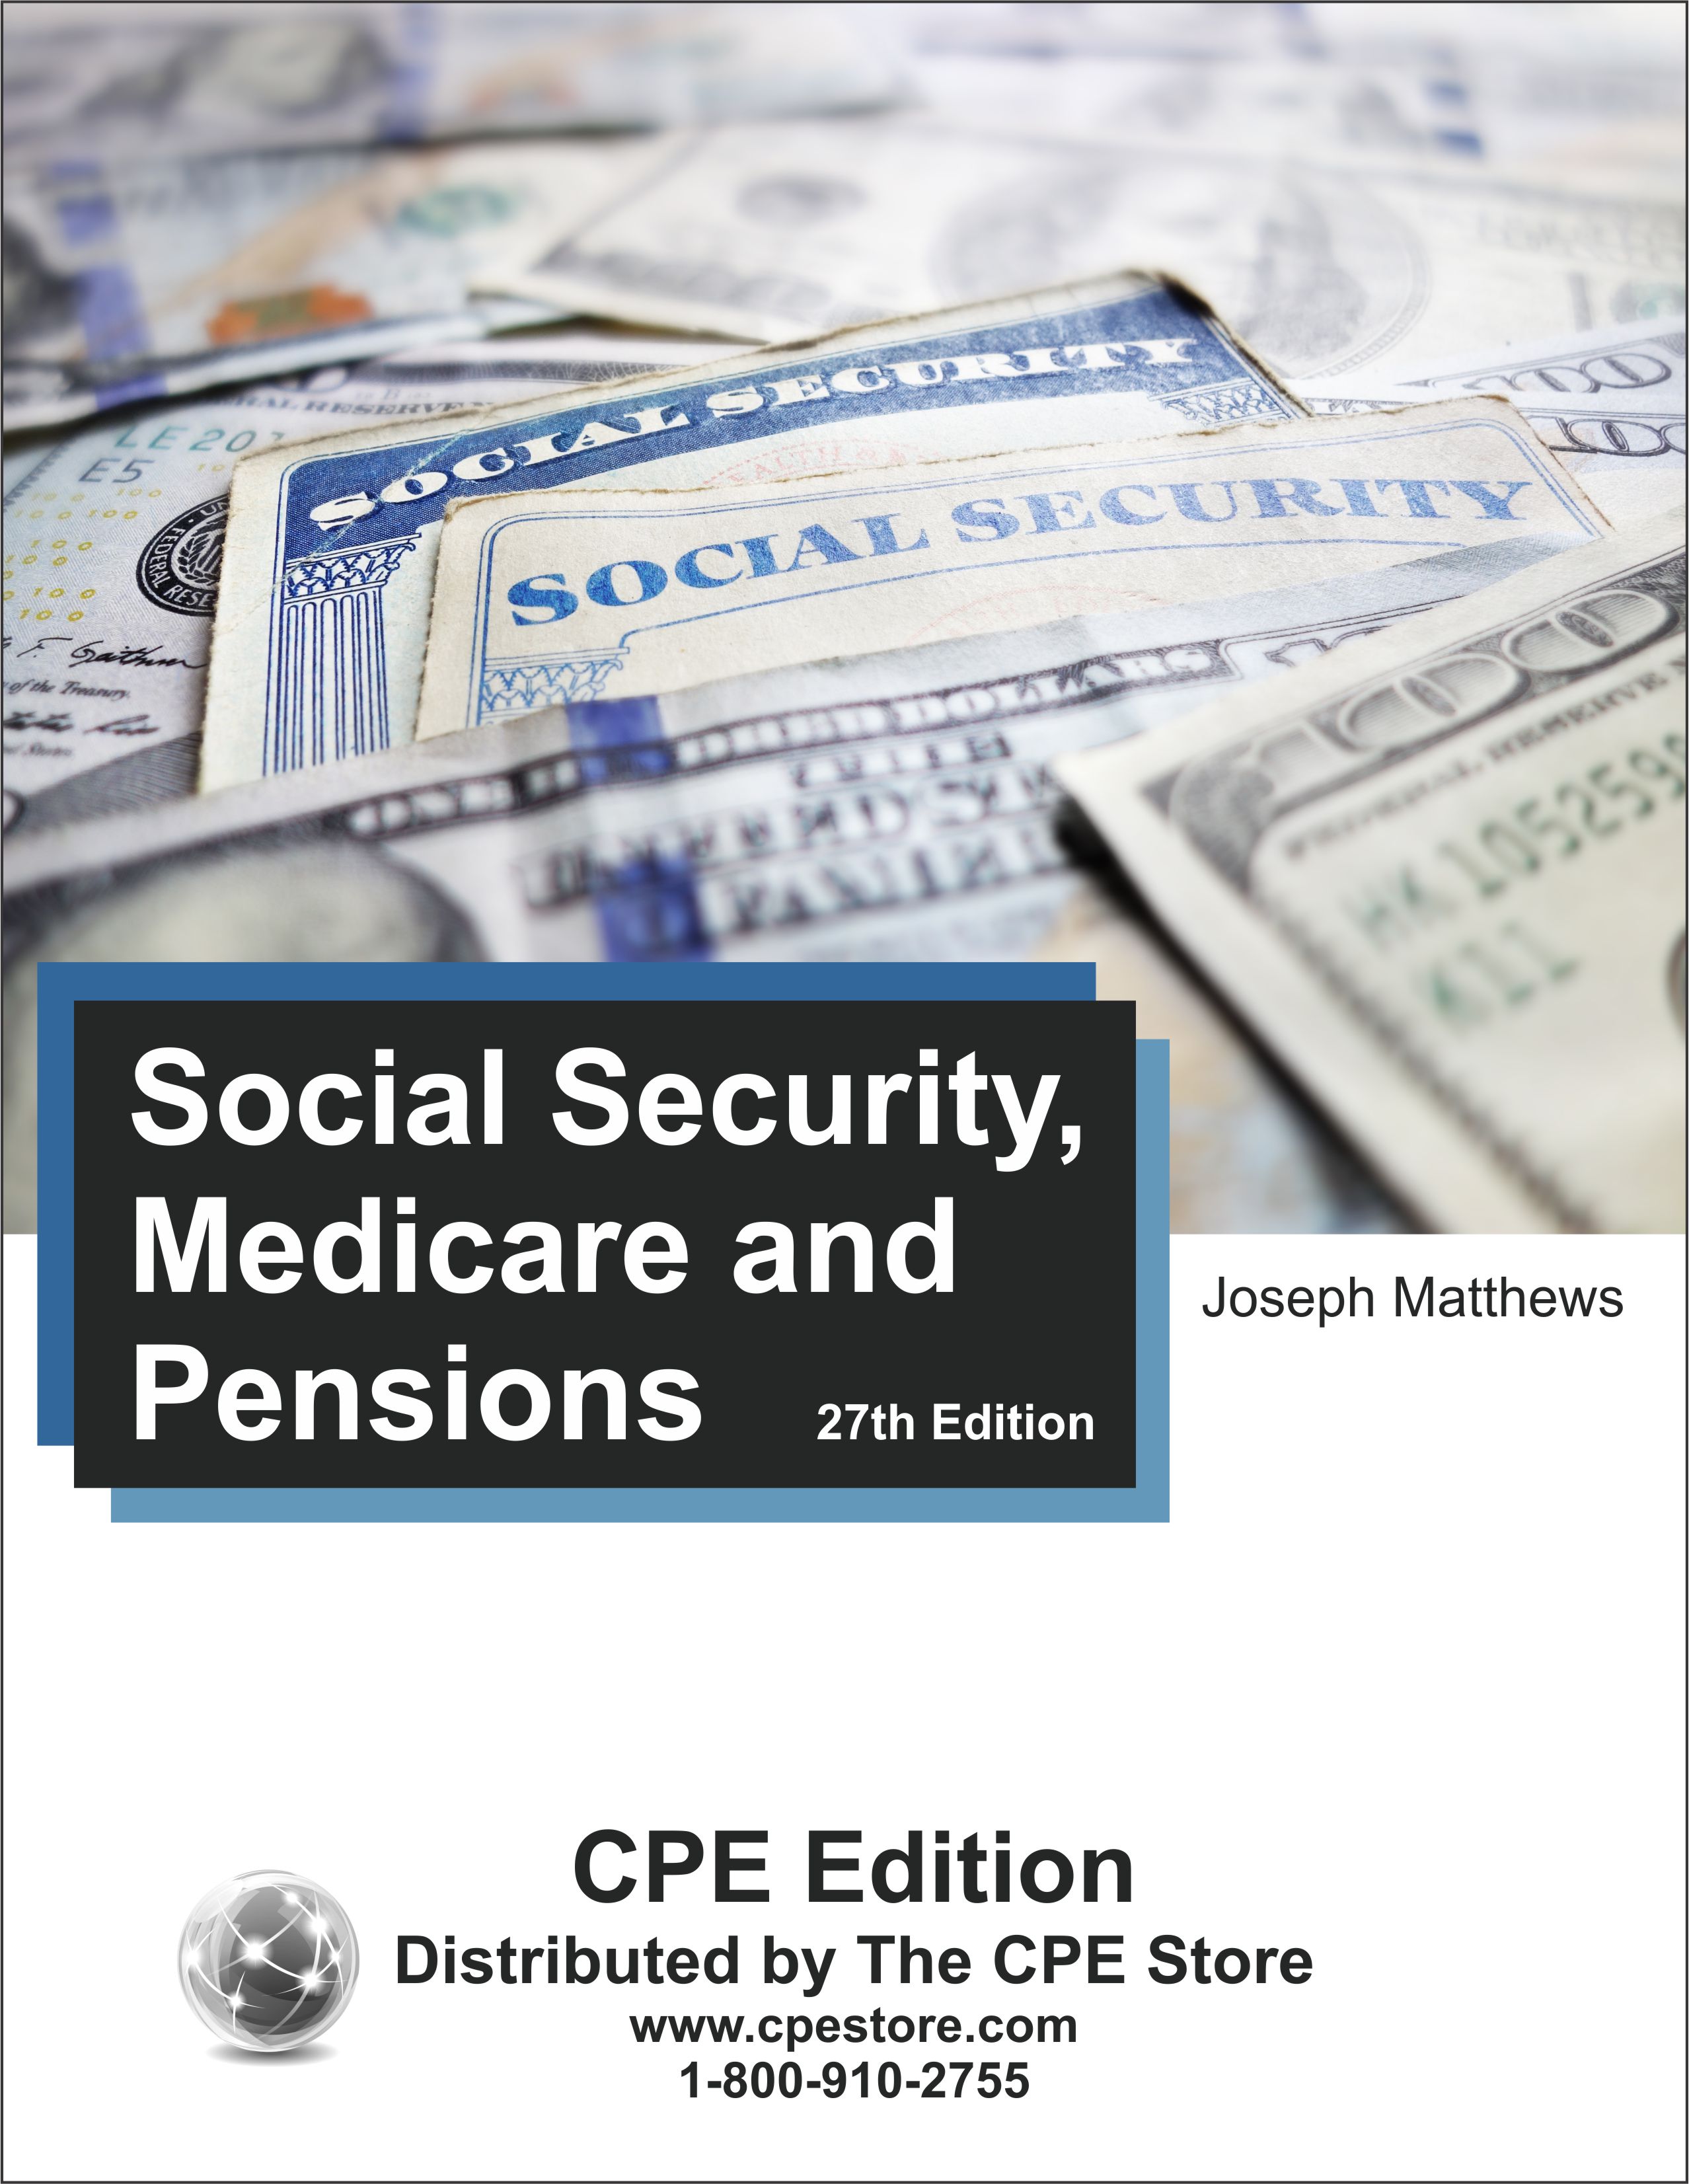 Social Security, Medicare and Pensions